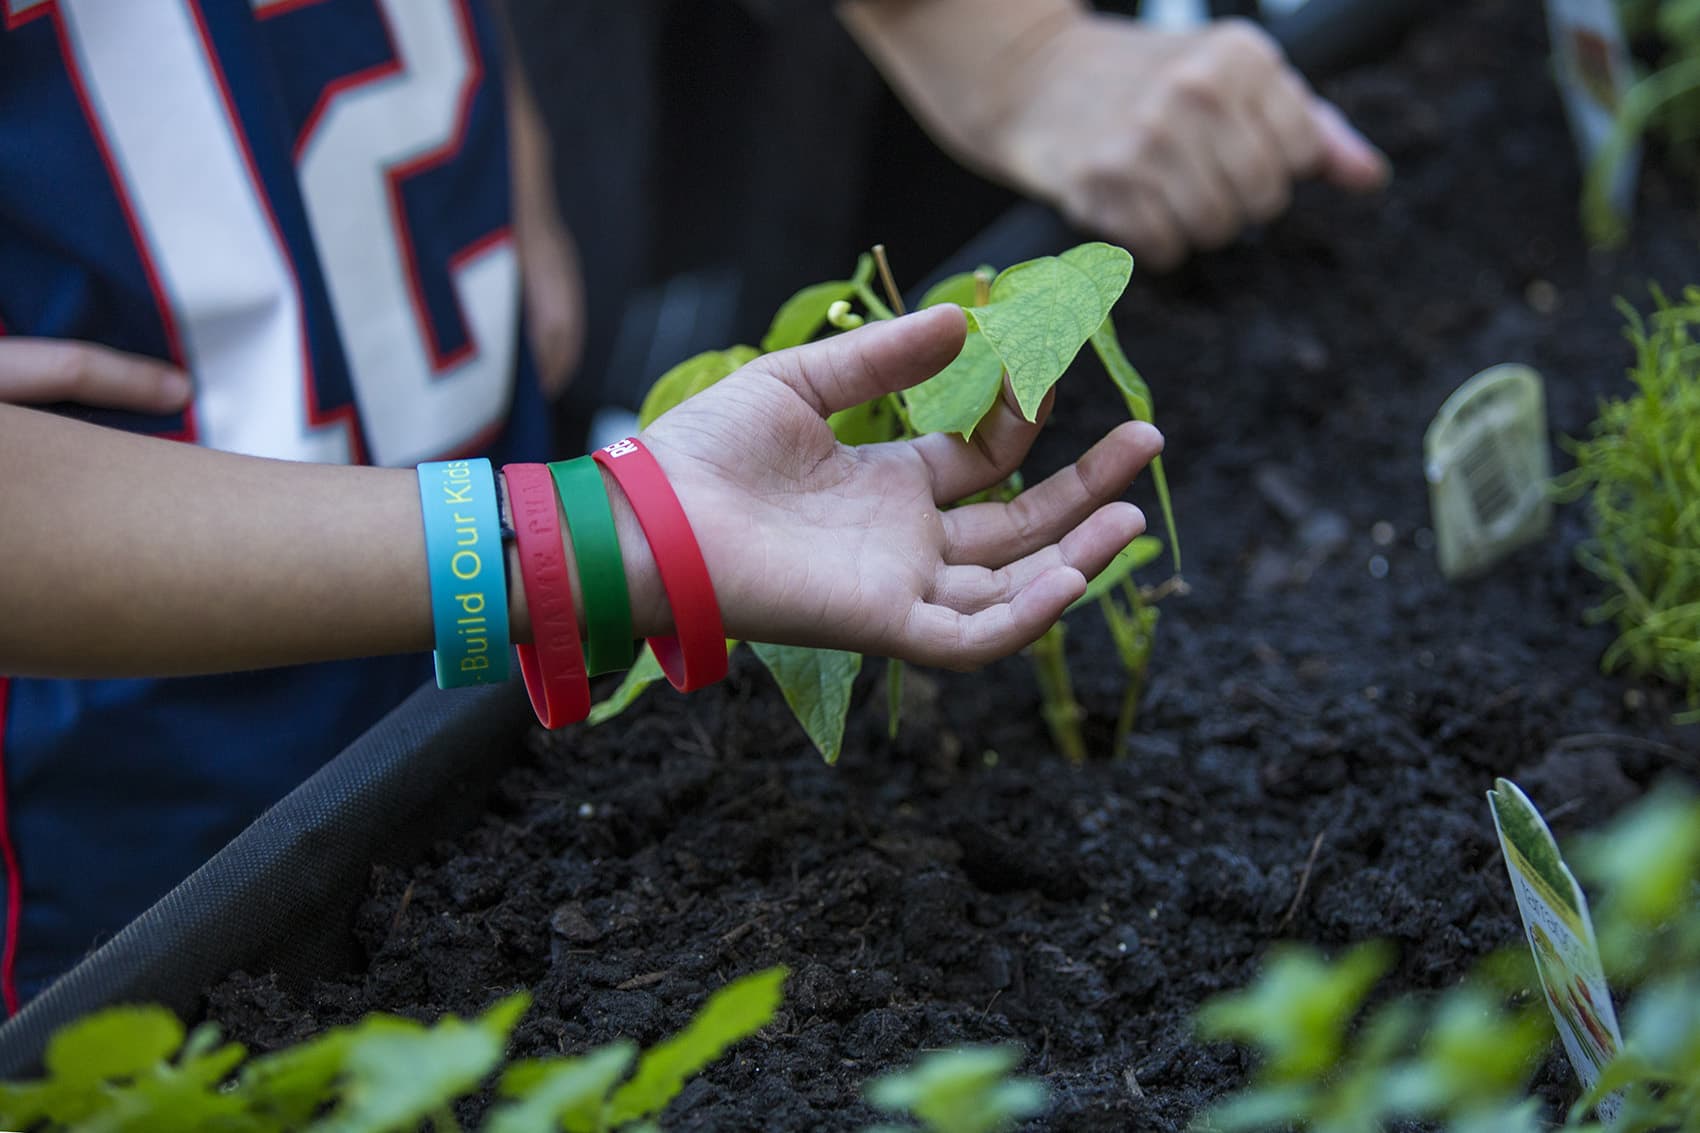 An 11-year-old patient at Franciscan Children's Hospital in Brighton touches a leaf on a lemon balm plant in the hospital's rooftop garden. (Jesse Costa/WBUR)